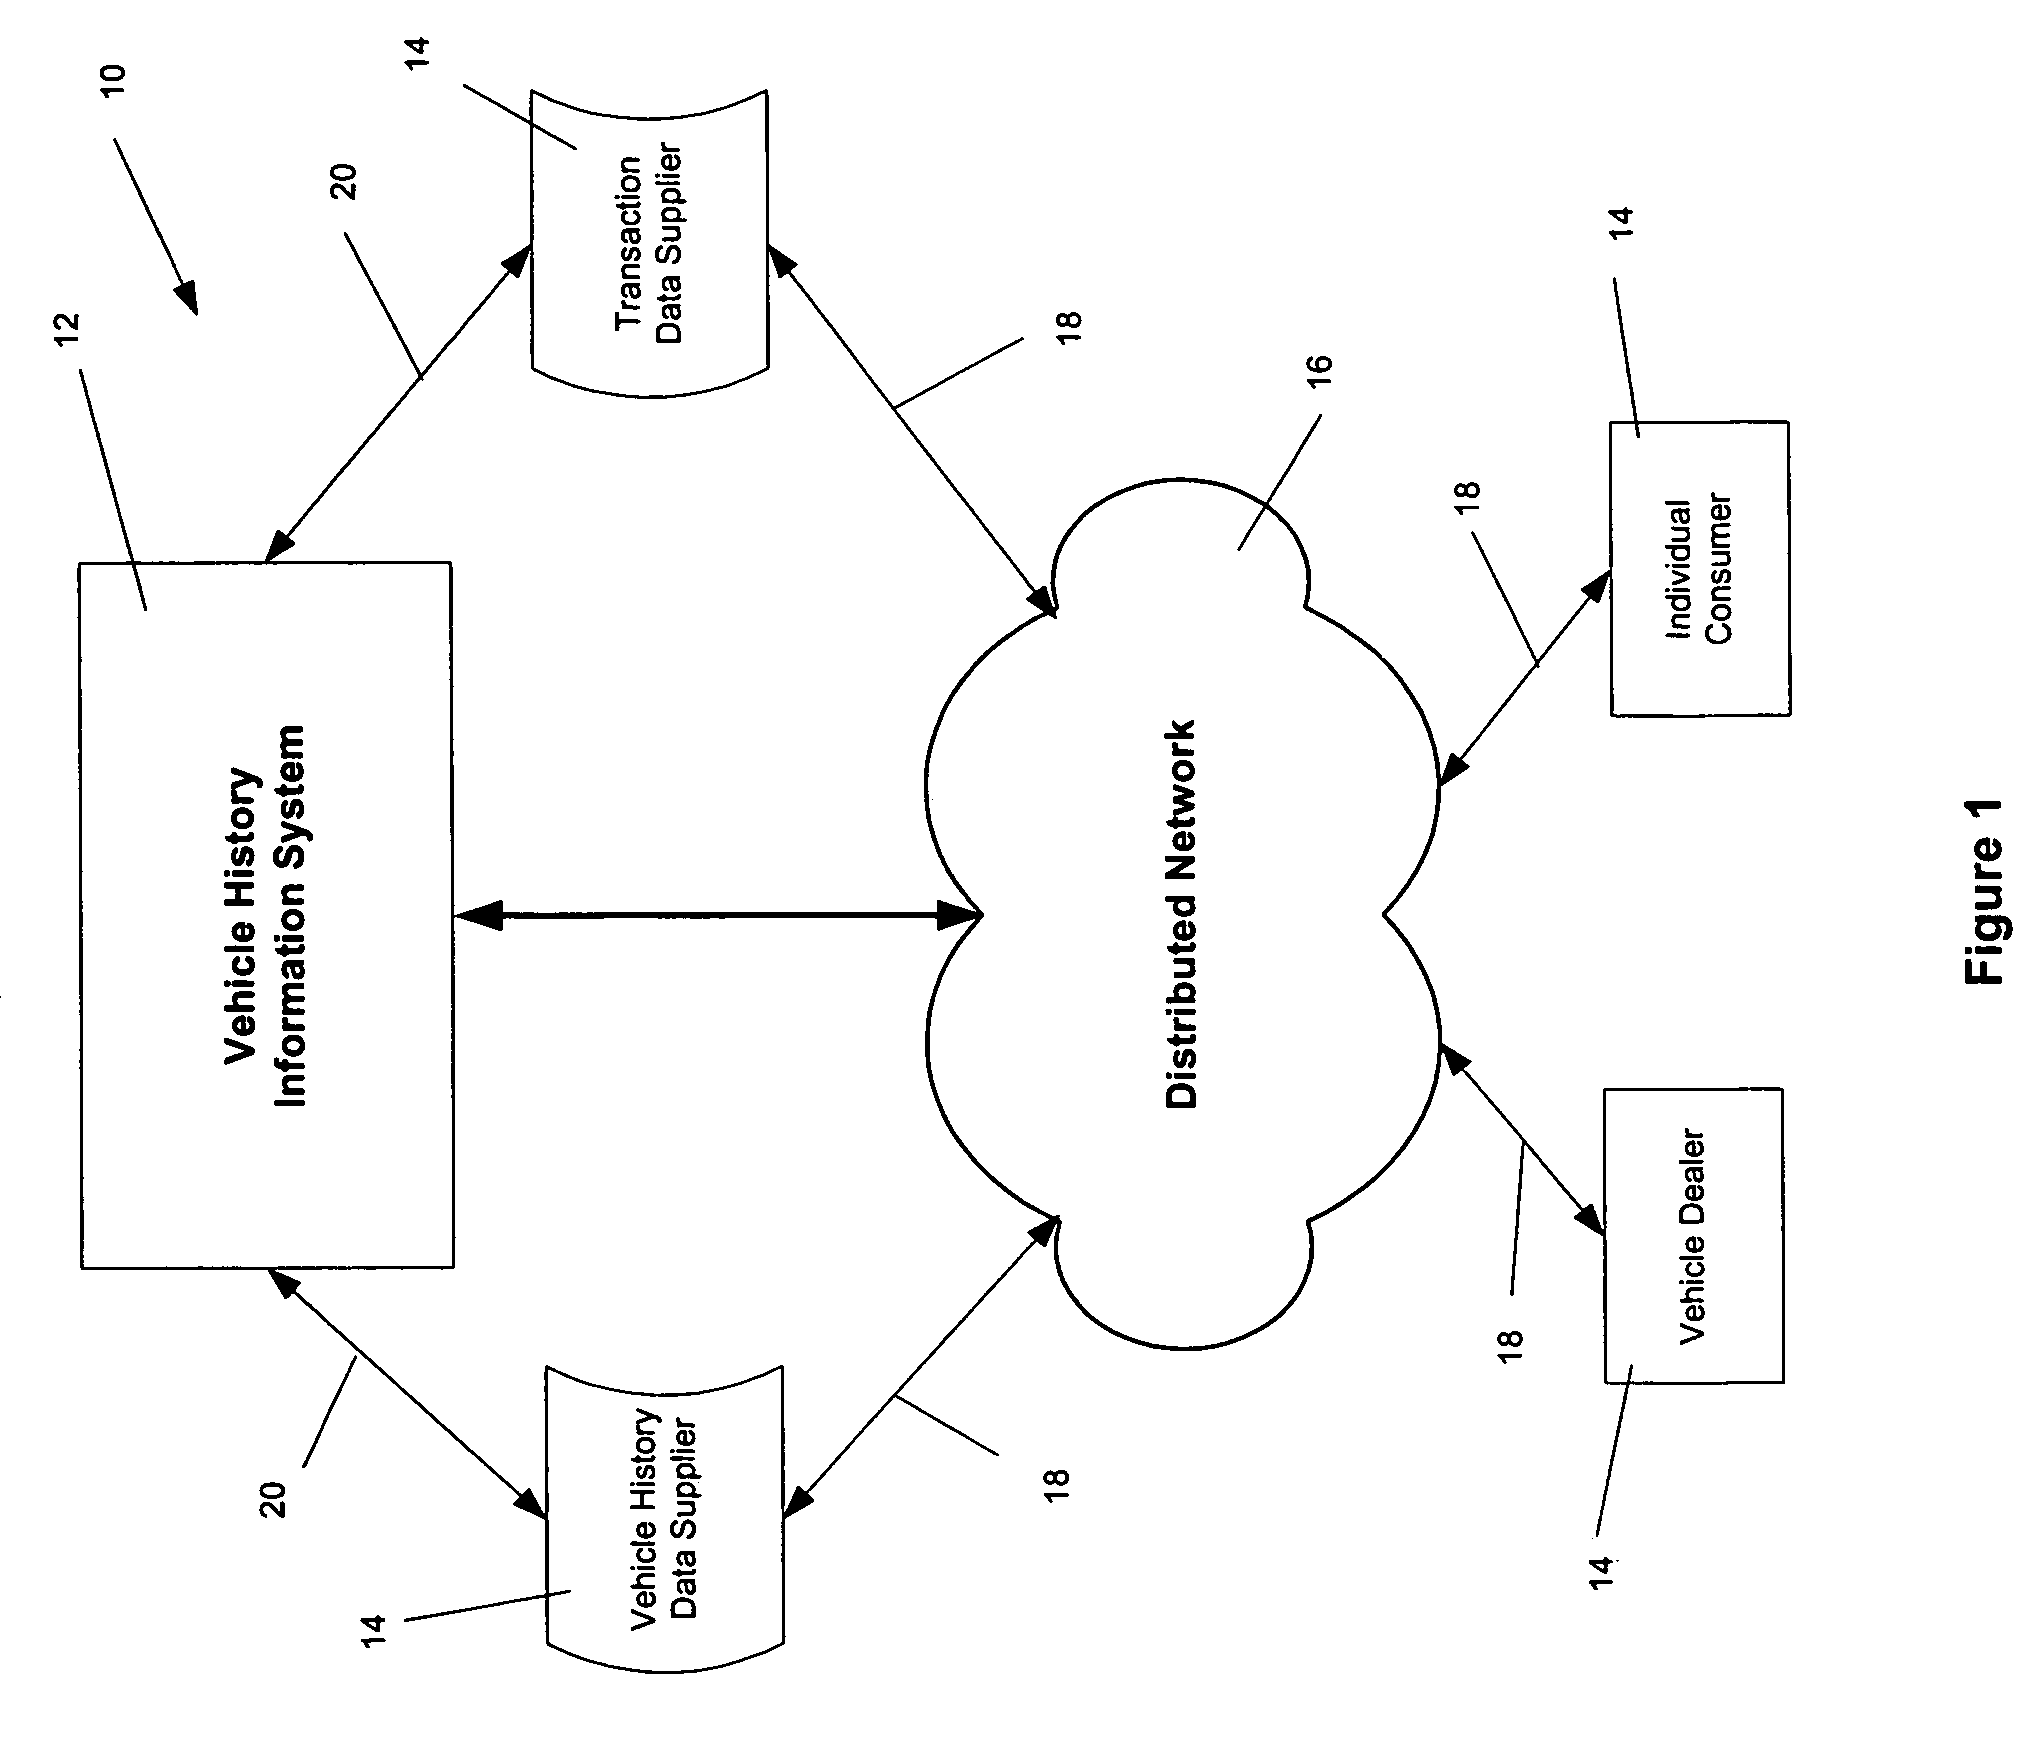 System and method for determining vehicle price adjustment values